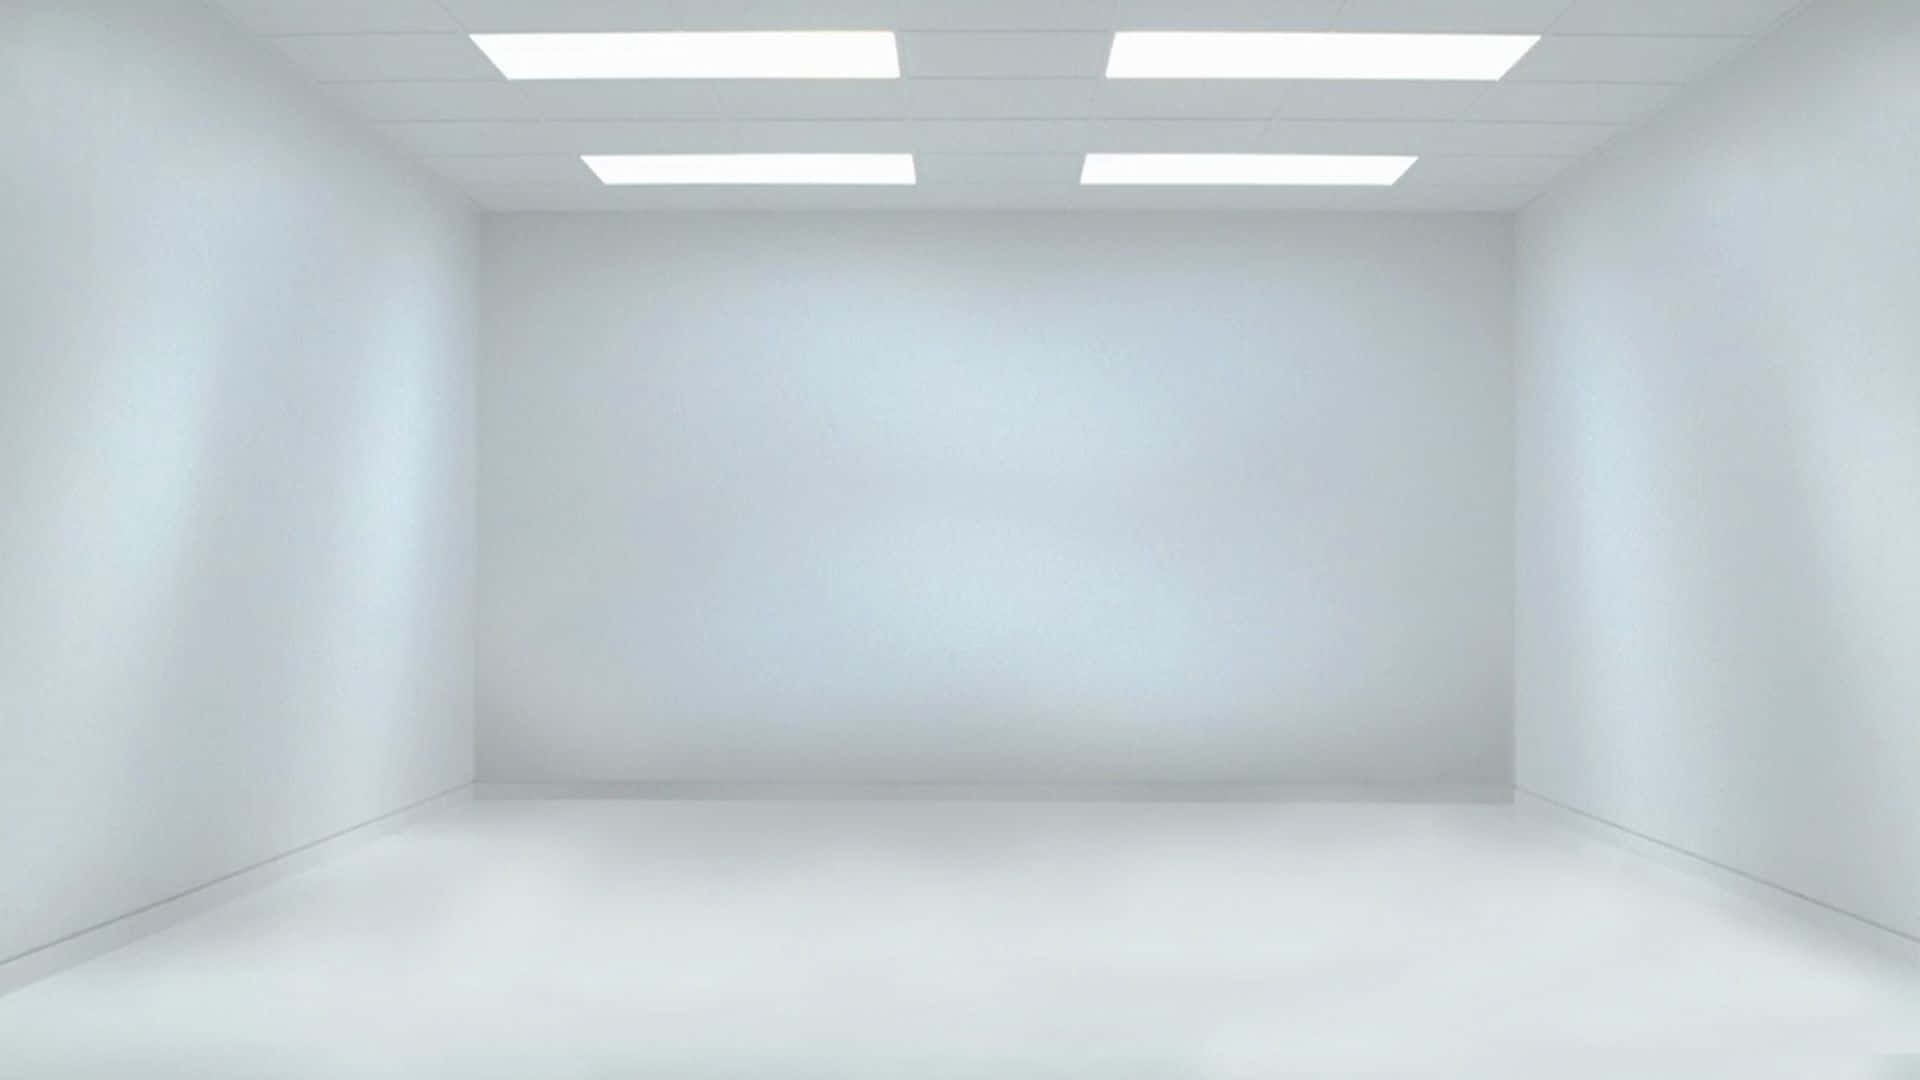 Empty Room With White Walls And Light Fixtures